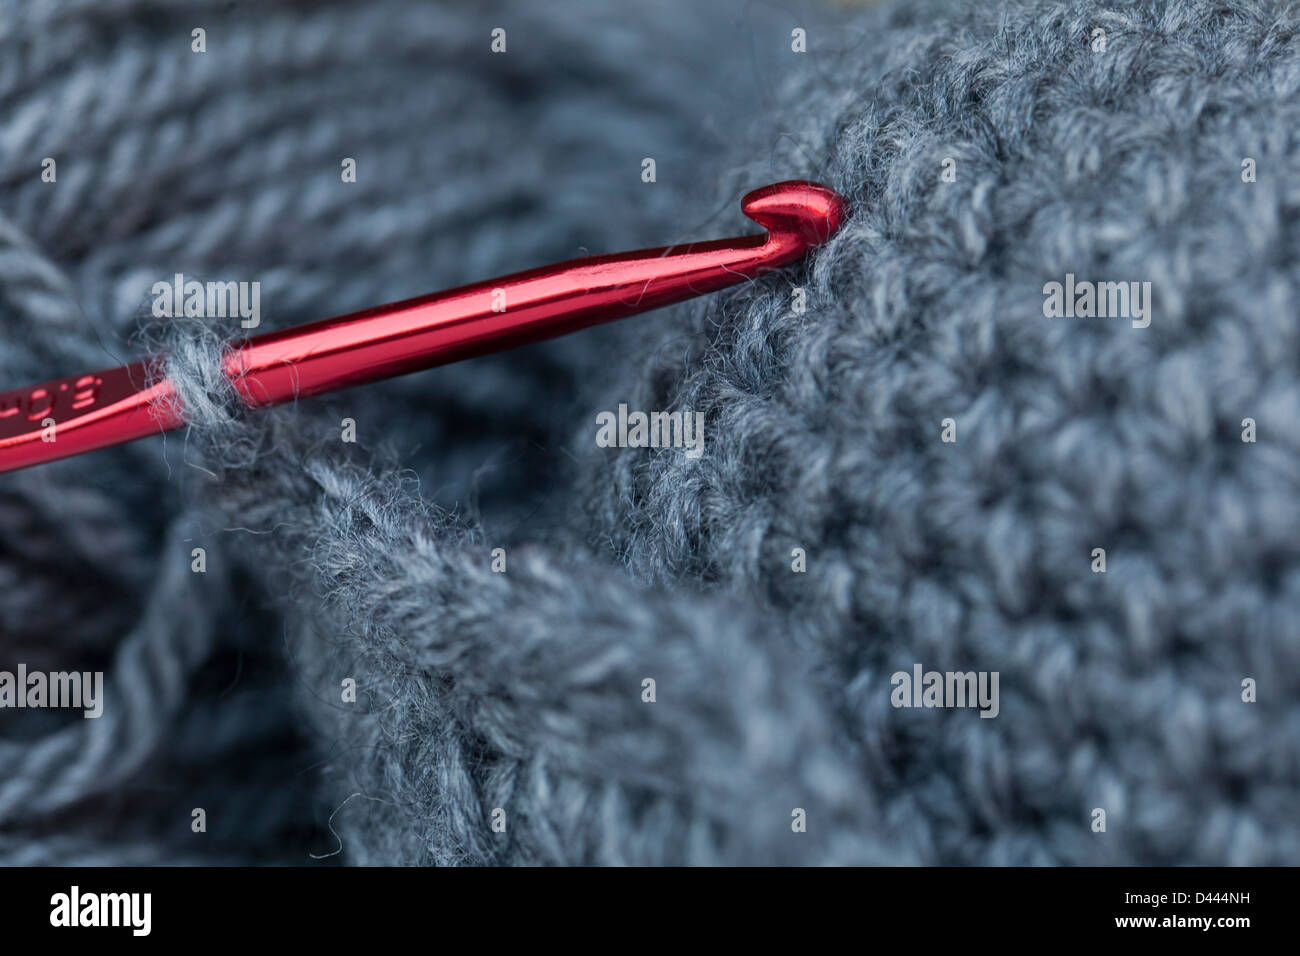 Red crochet hook in a grey skein Stock Photo